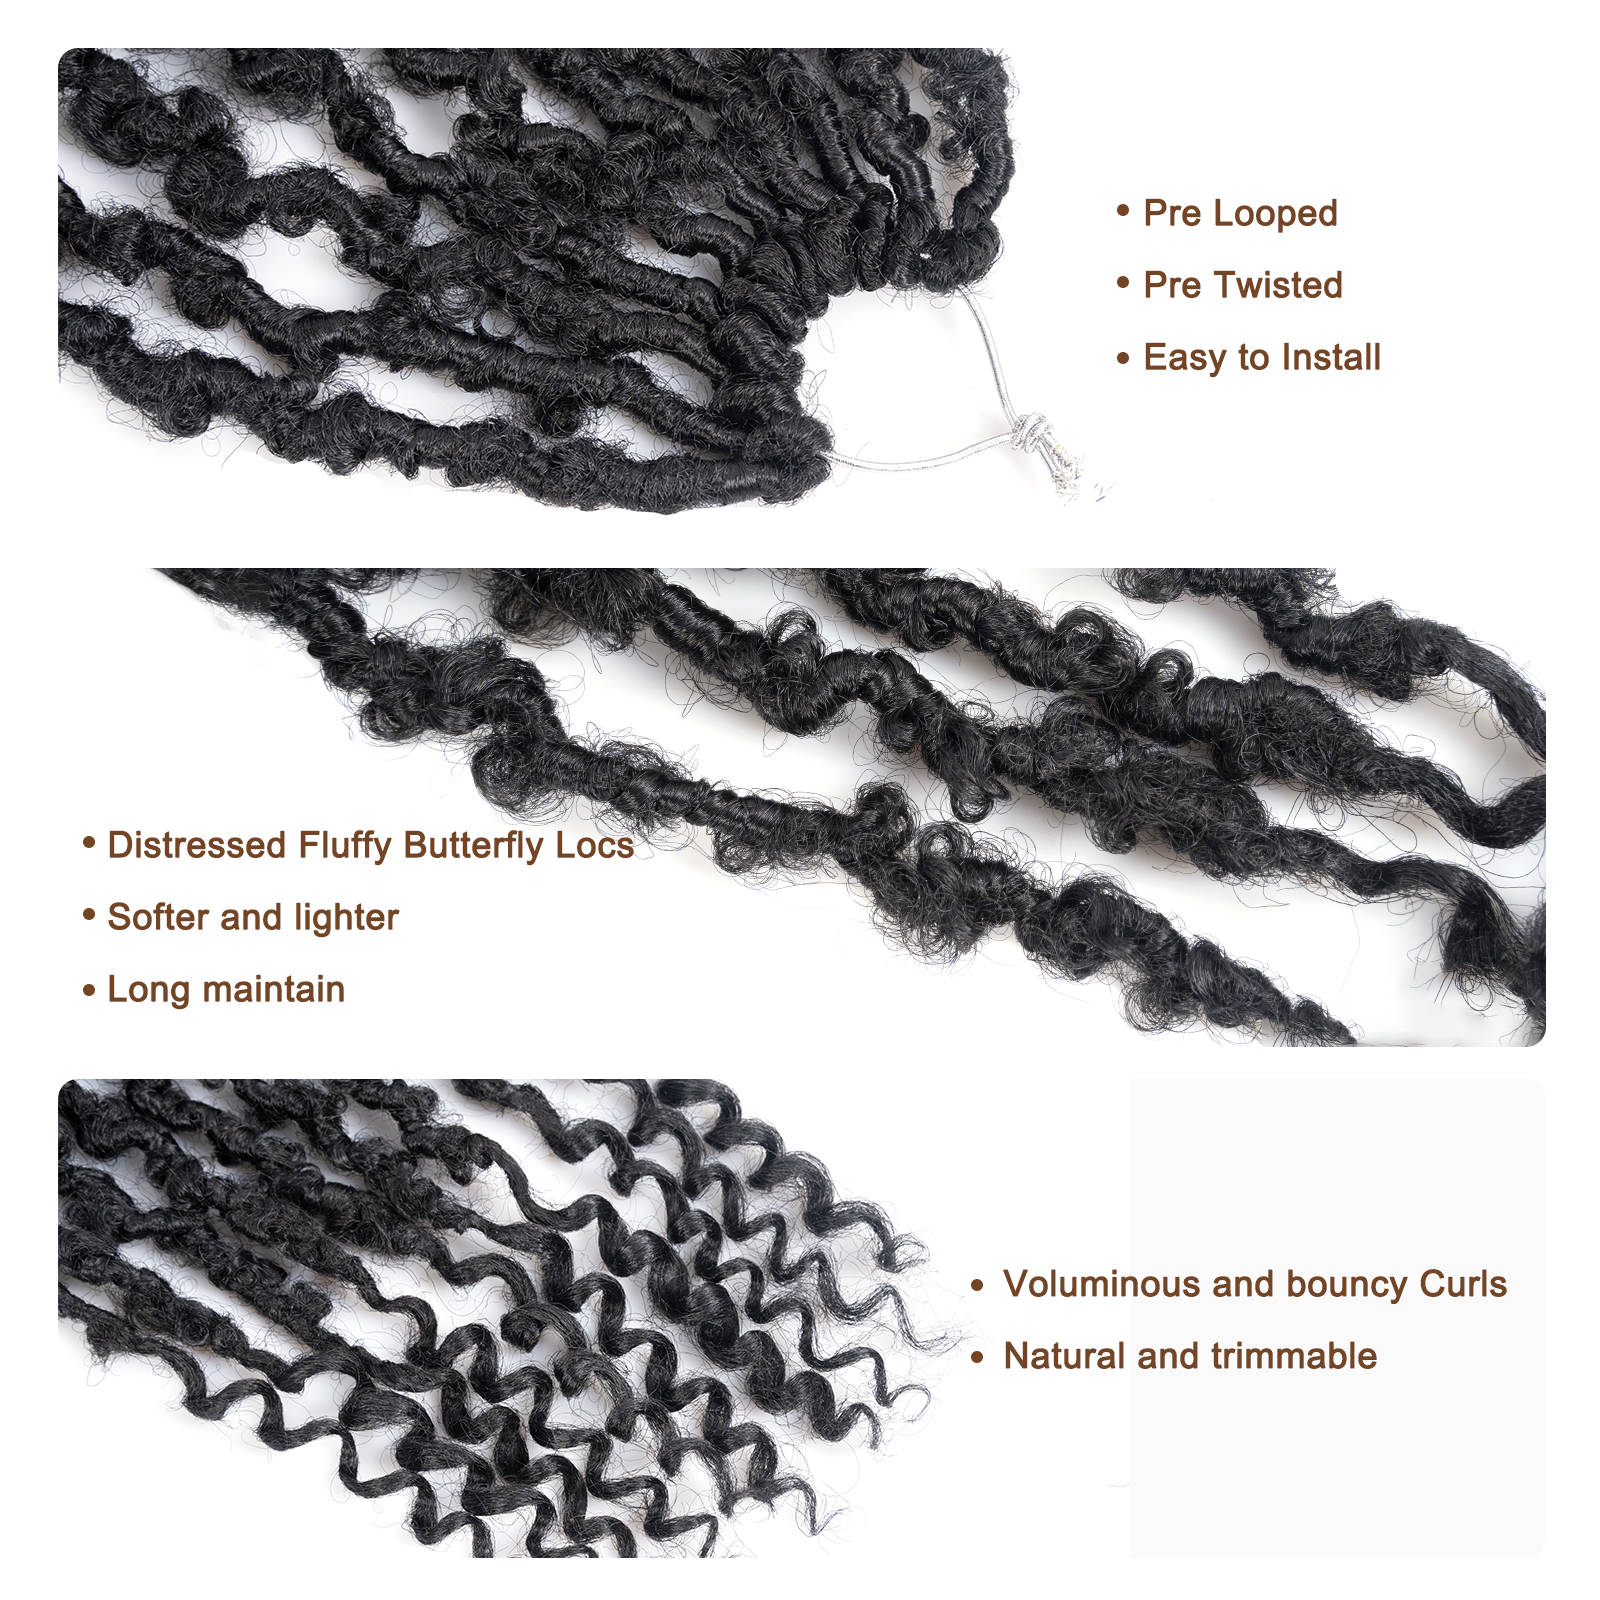 Toyotress Boho Butterfly Locs with Curl 12-18